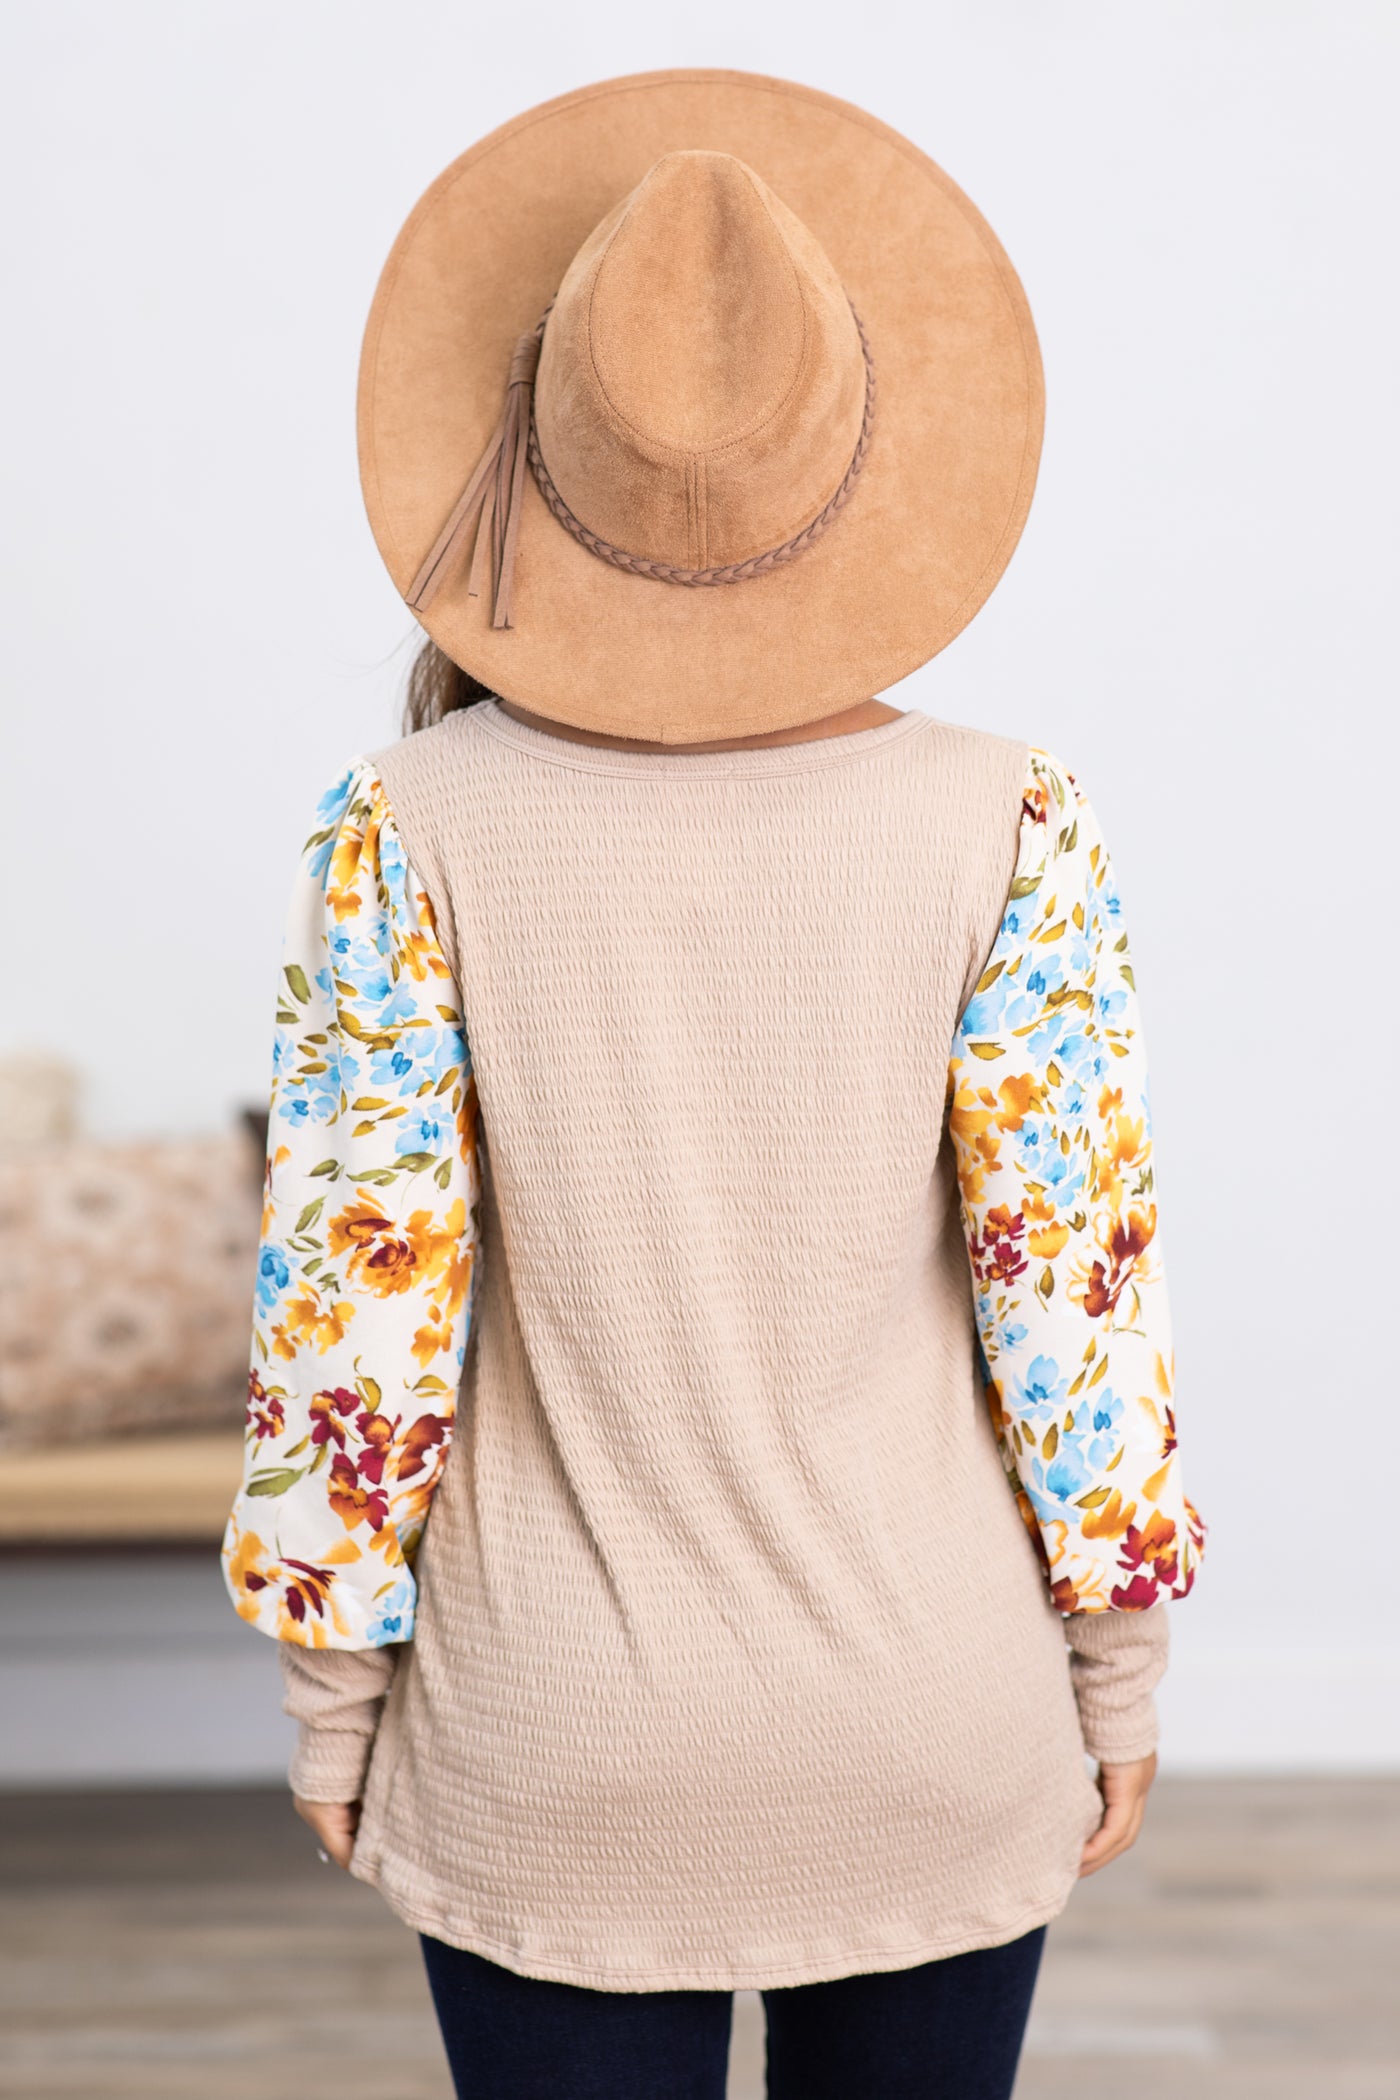 Tan Top With Floral Balloon Sleeves